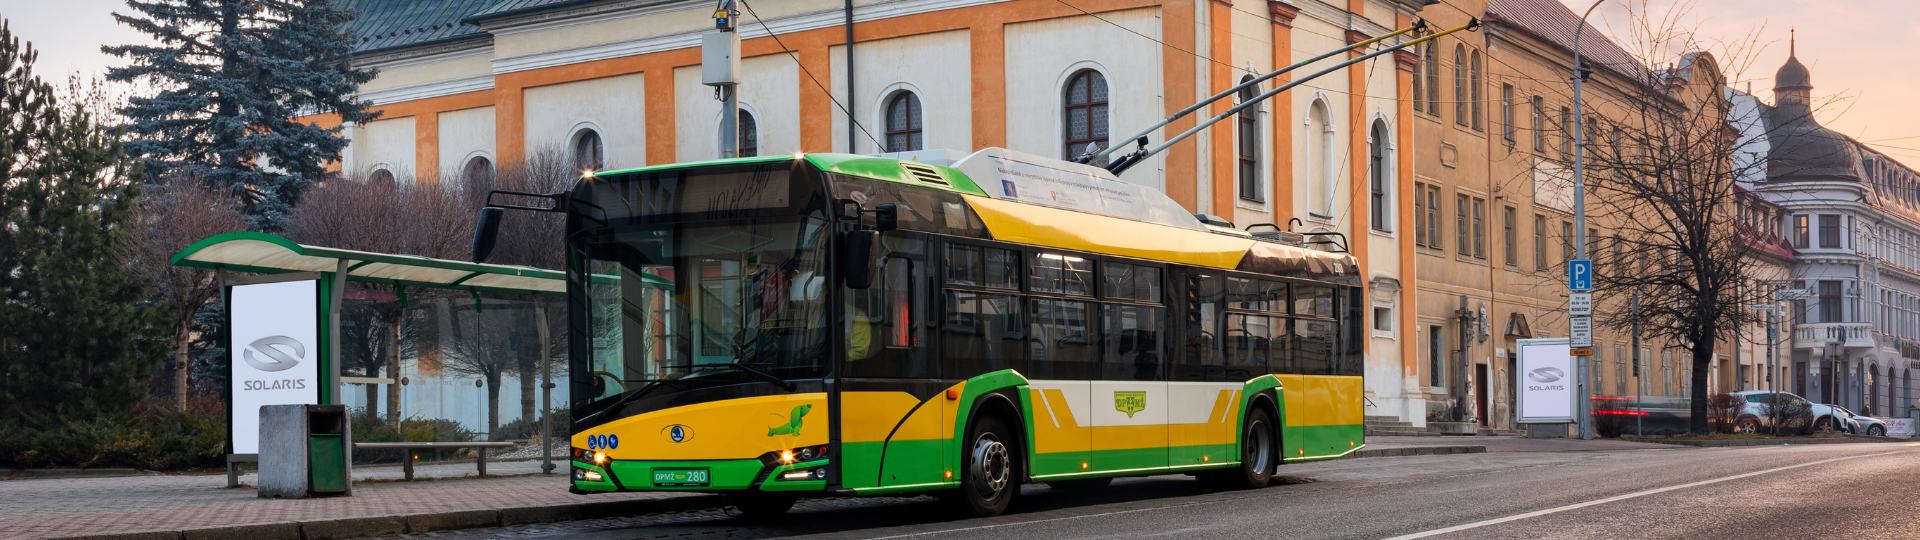 More Solaris trolleybuses going to Italian cities